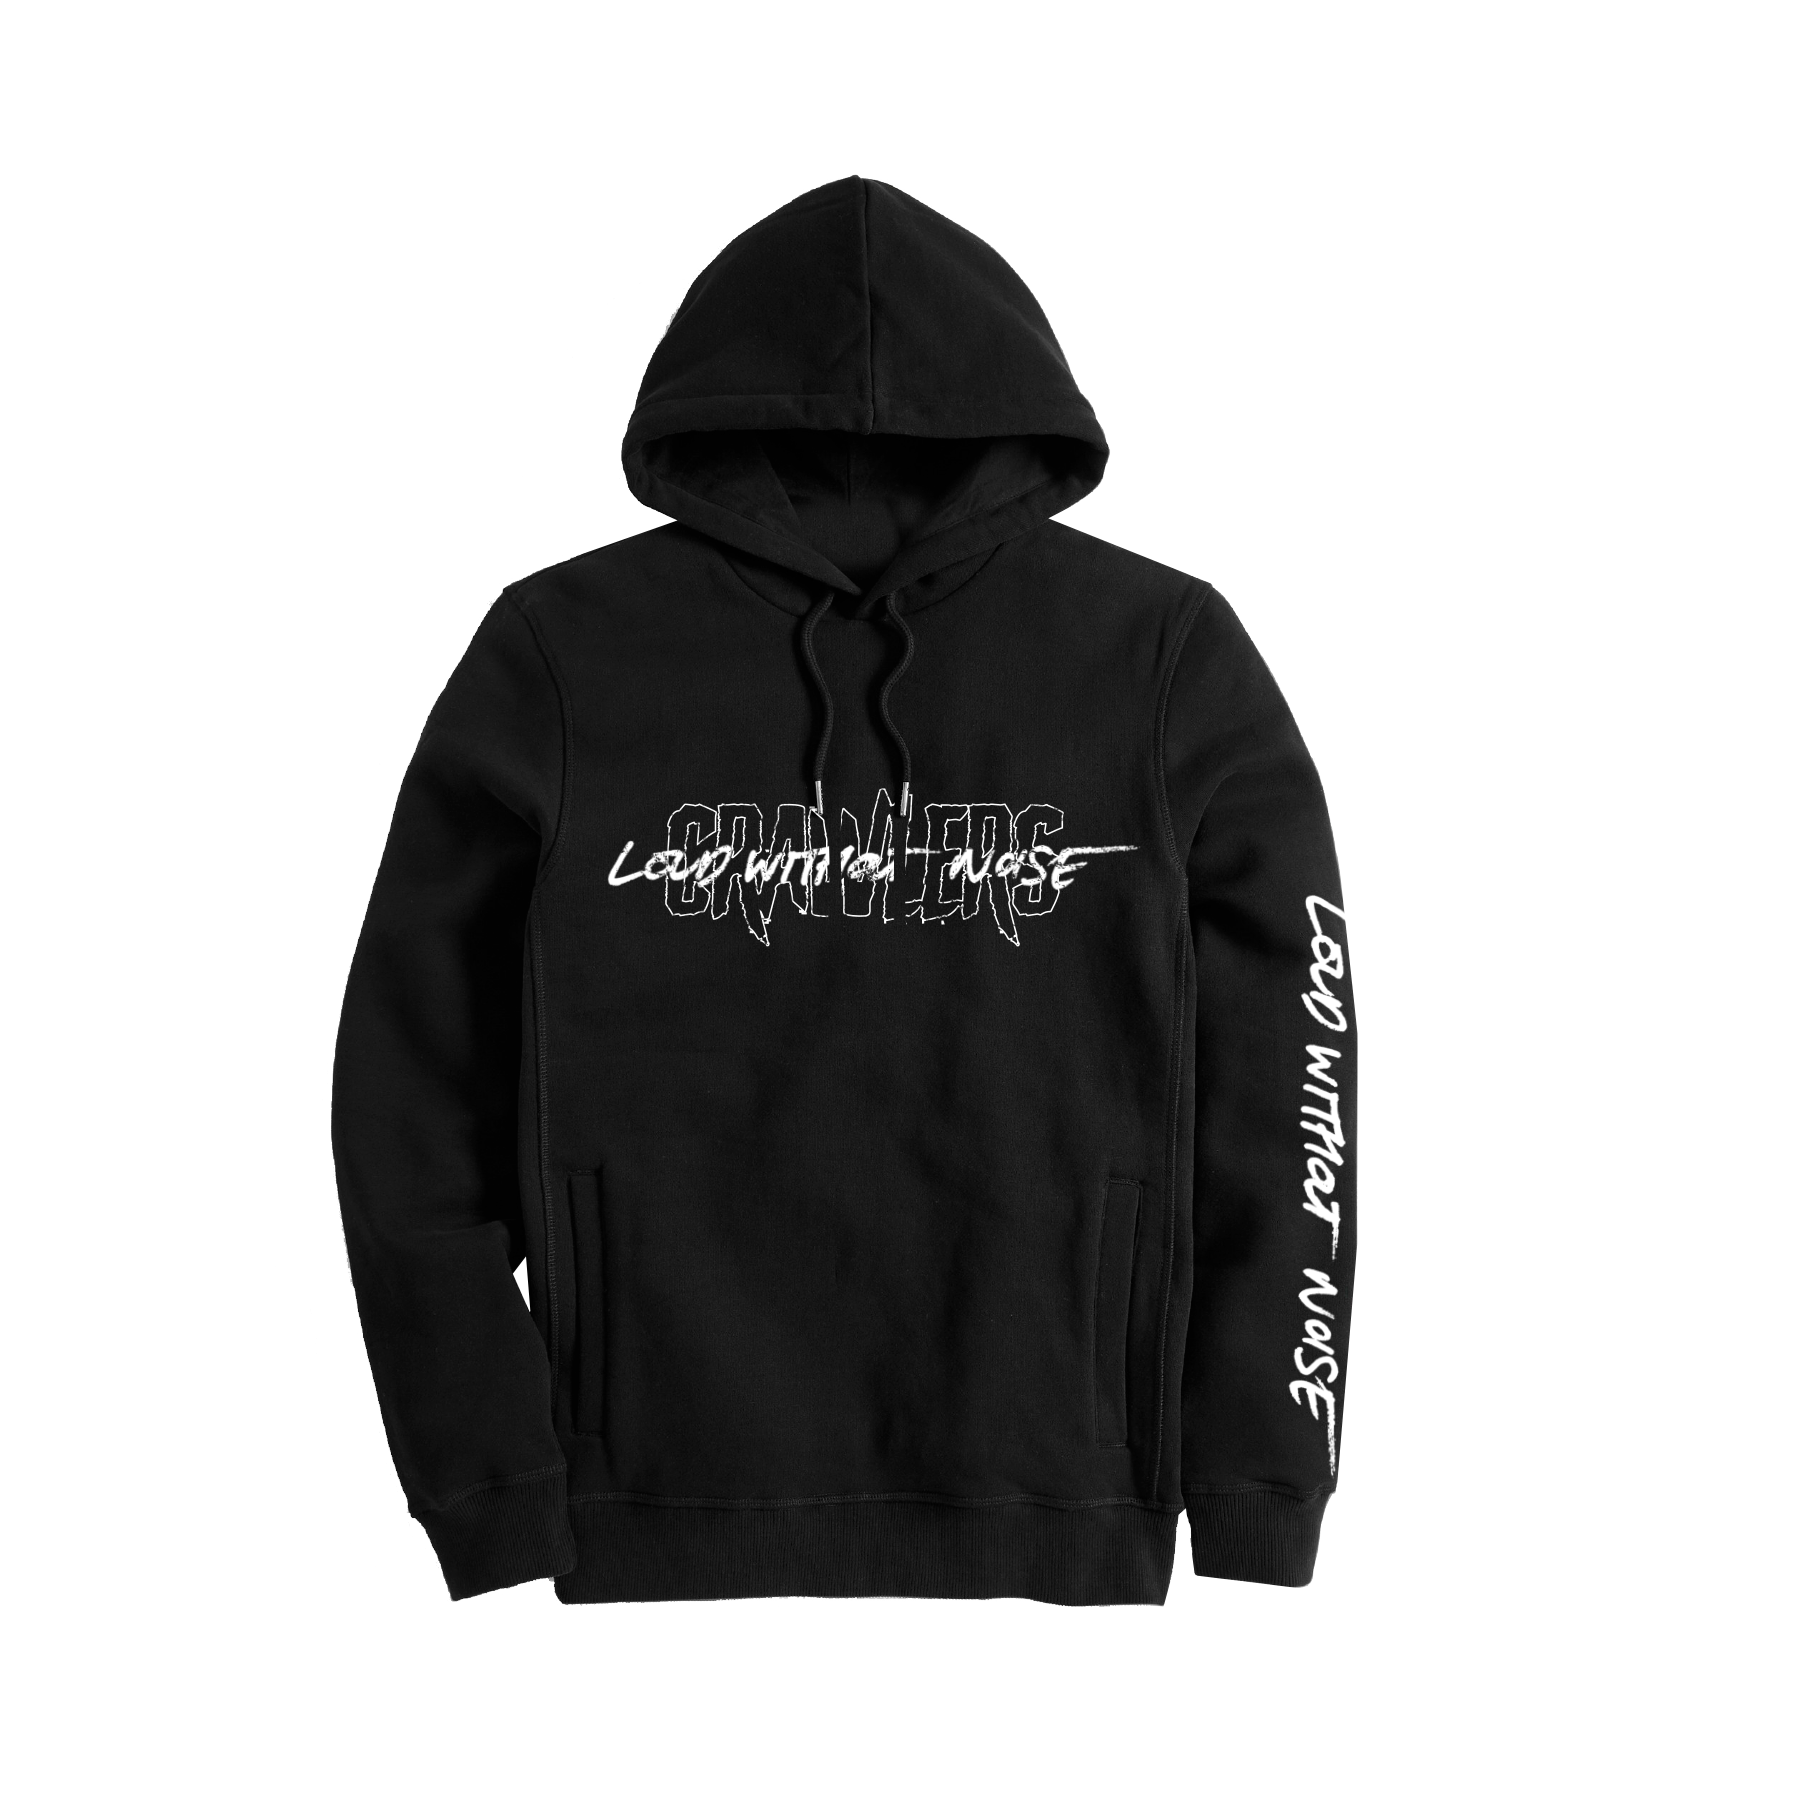 Crawlers - Black ‘loud without noise’ graphic print hoodie